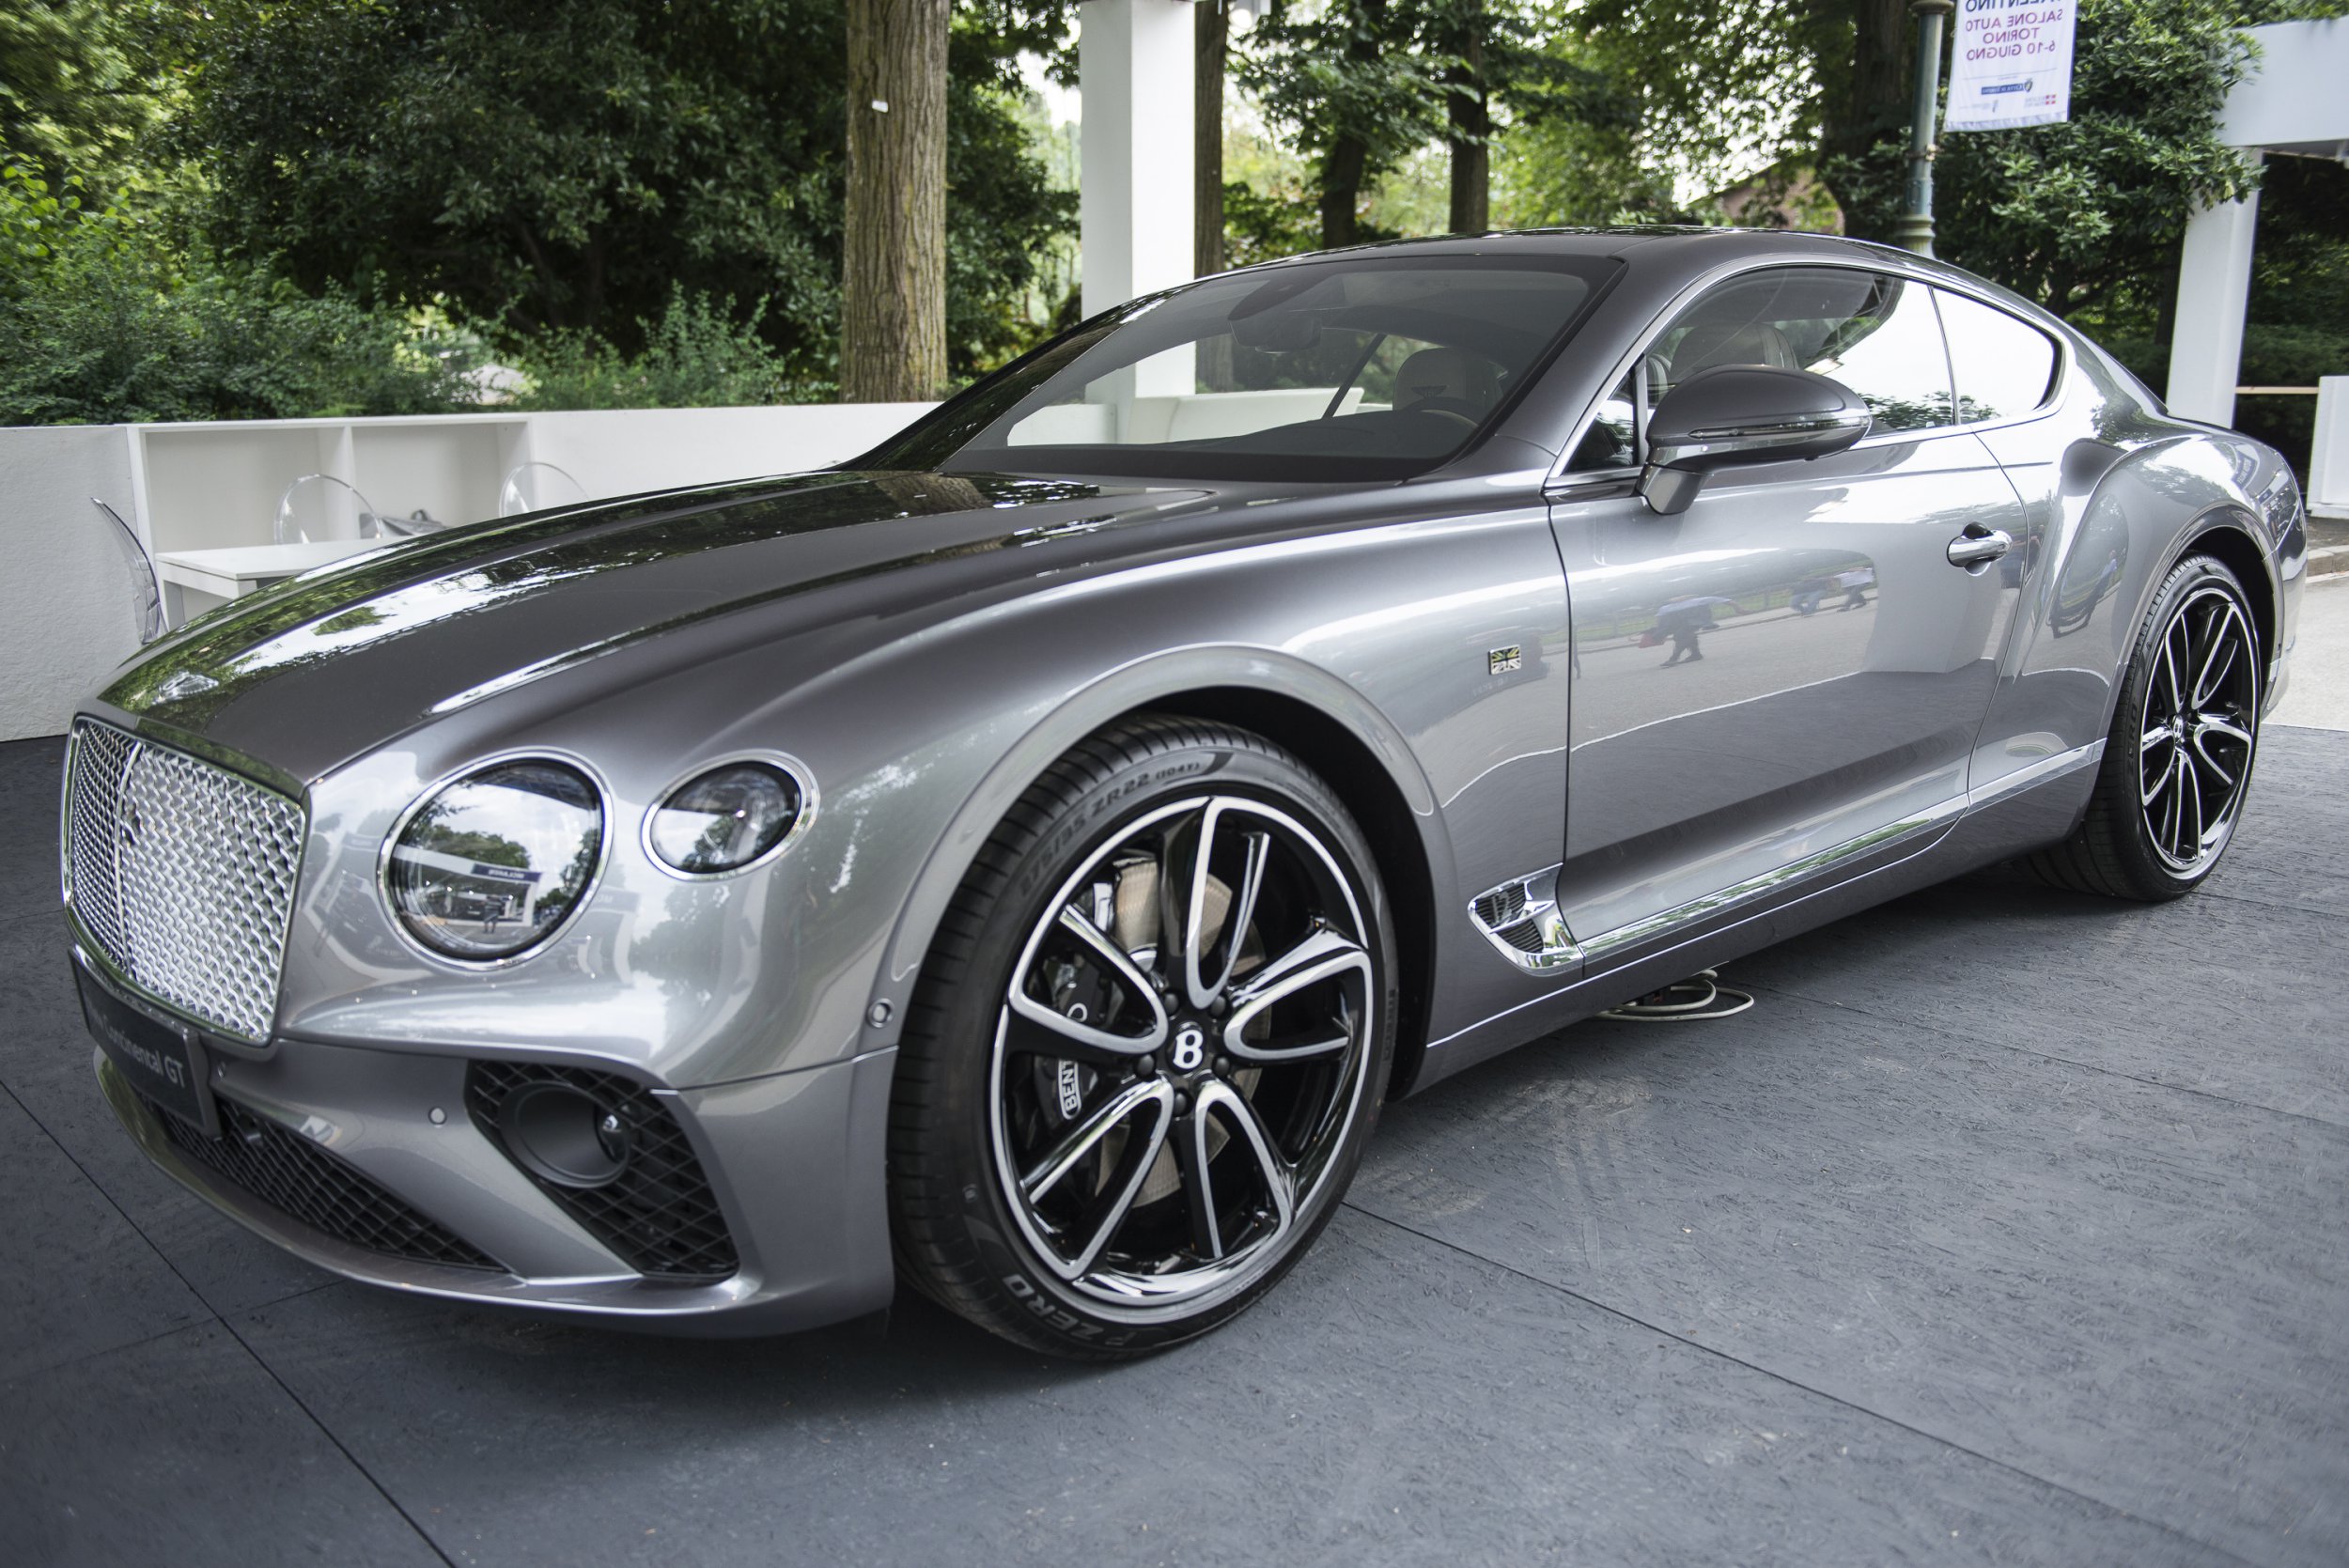 It is no surprise that the American power couple owns a Bentley, the British luxury